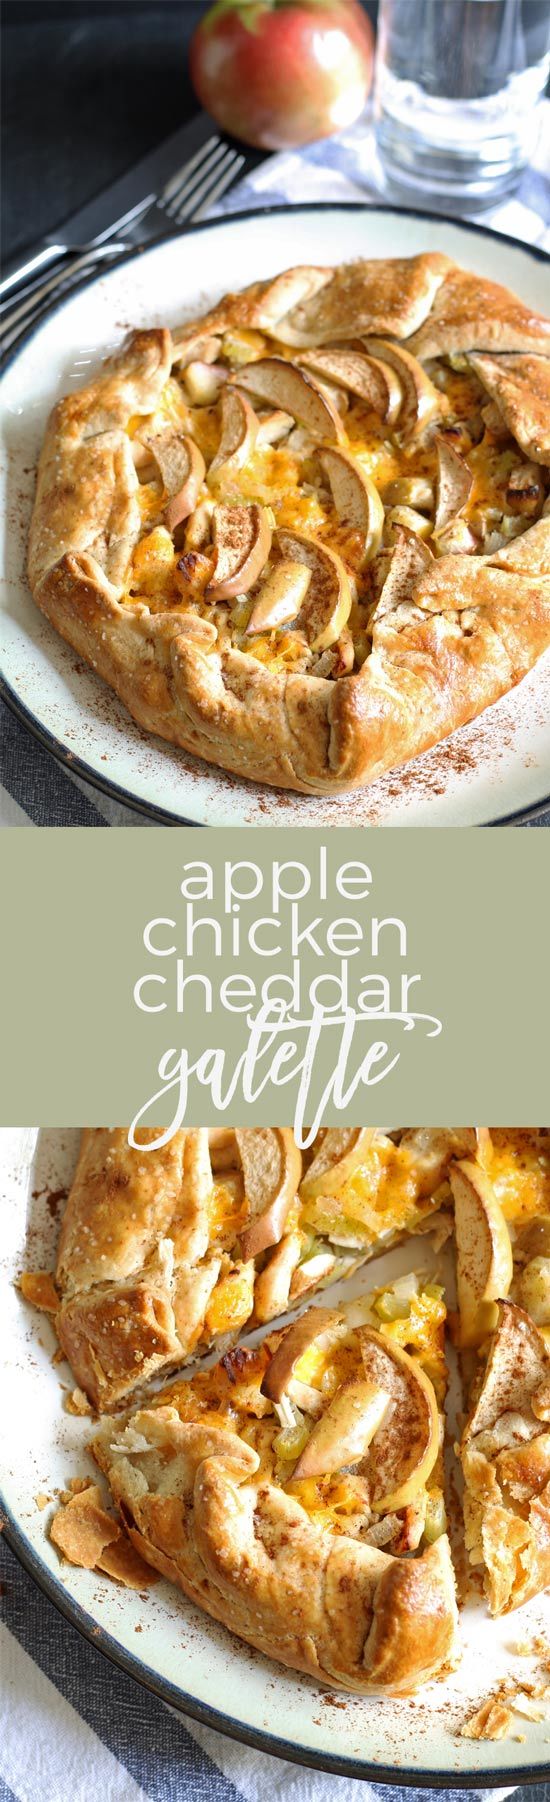 If you're looking for savory recipes with apples, this apple chicken cheddar galette is the one. It is perfect for dinner - and autumn. | honeyandbirch.com